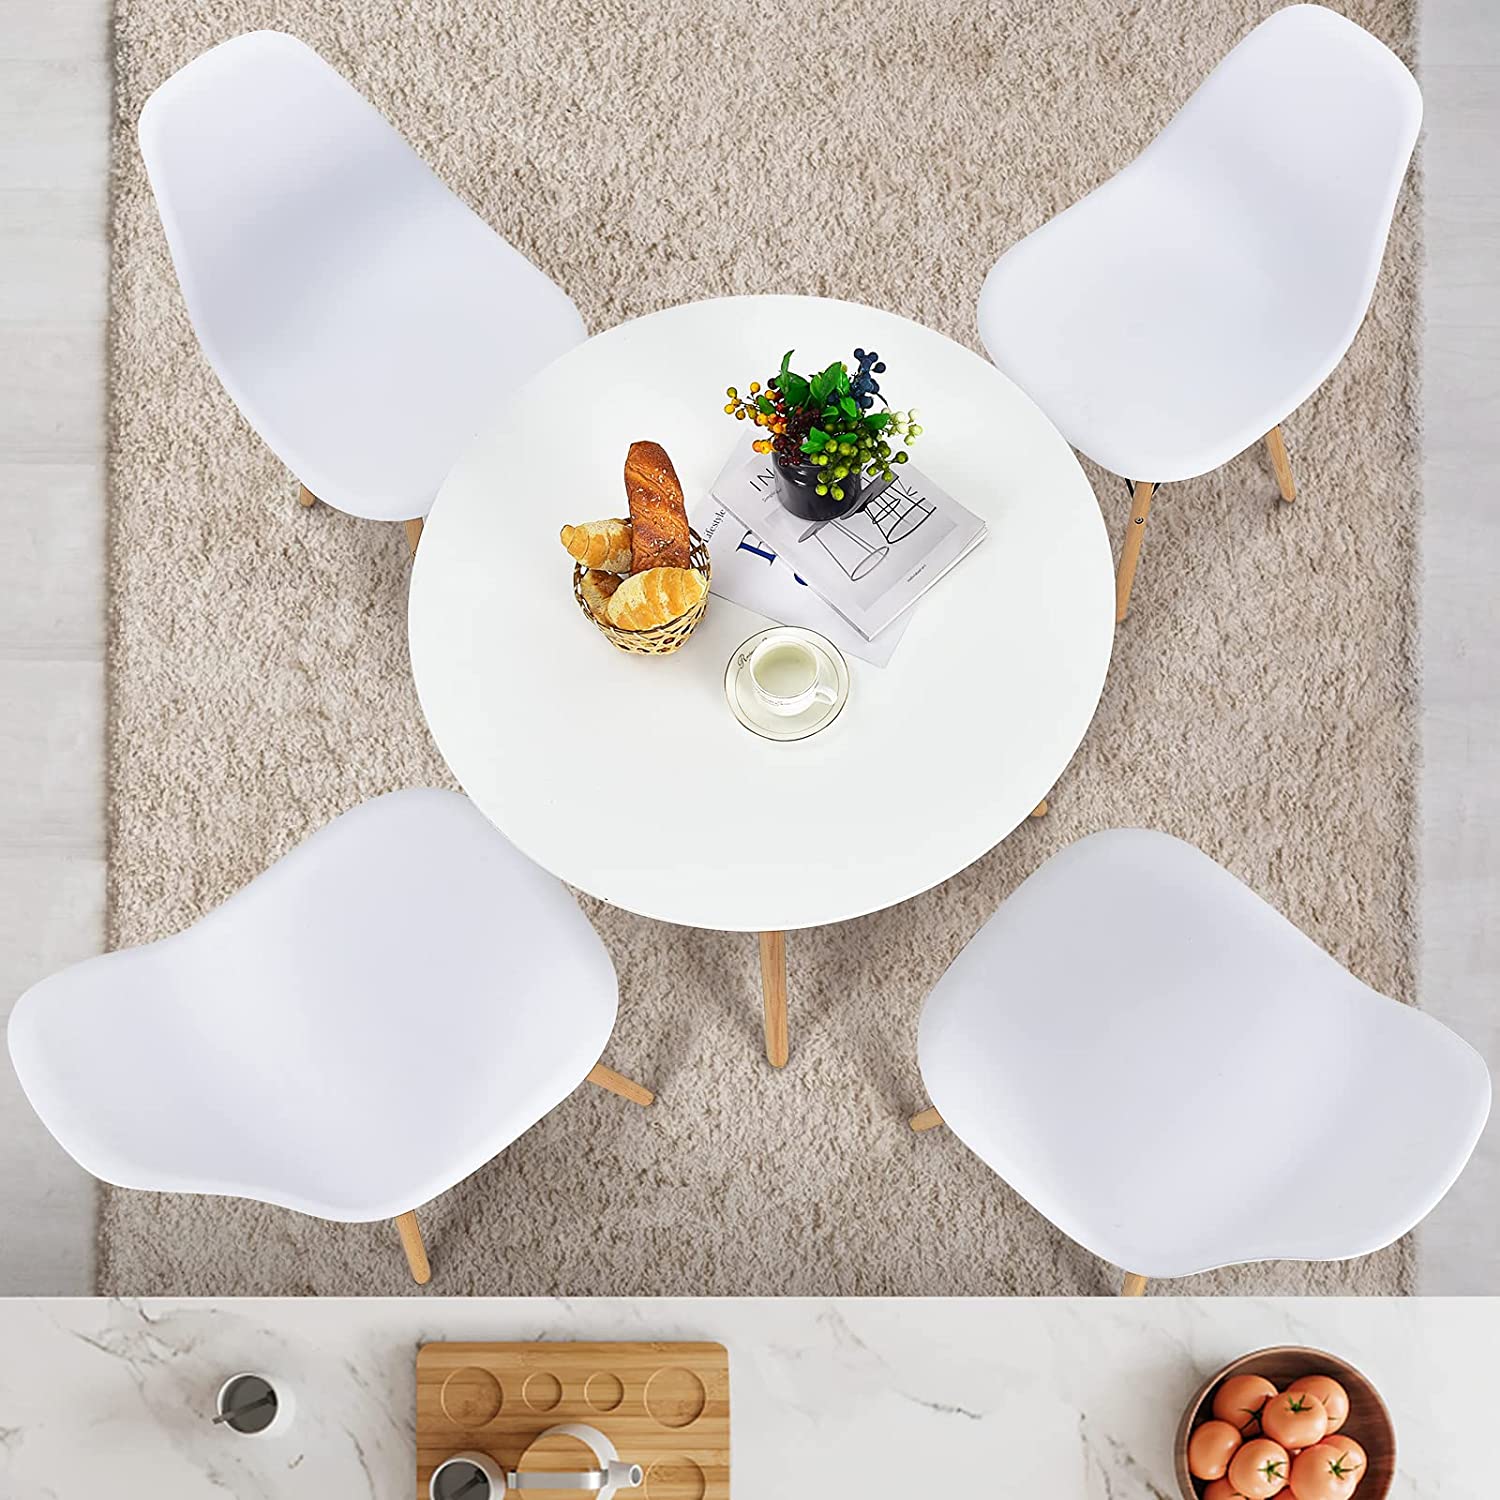 5 Pieces Modern Dining Table Set with Round Table and 4 White Chairs for Kitchen Small Space